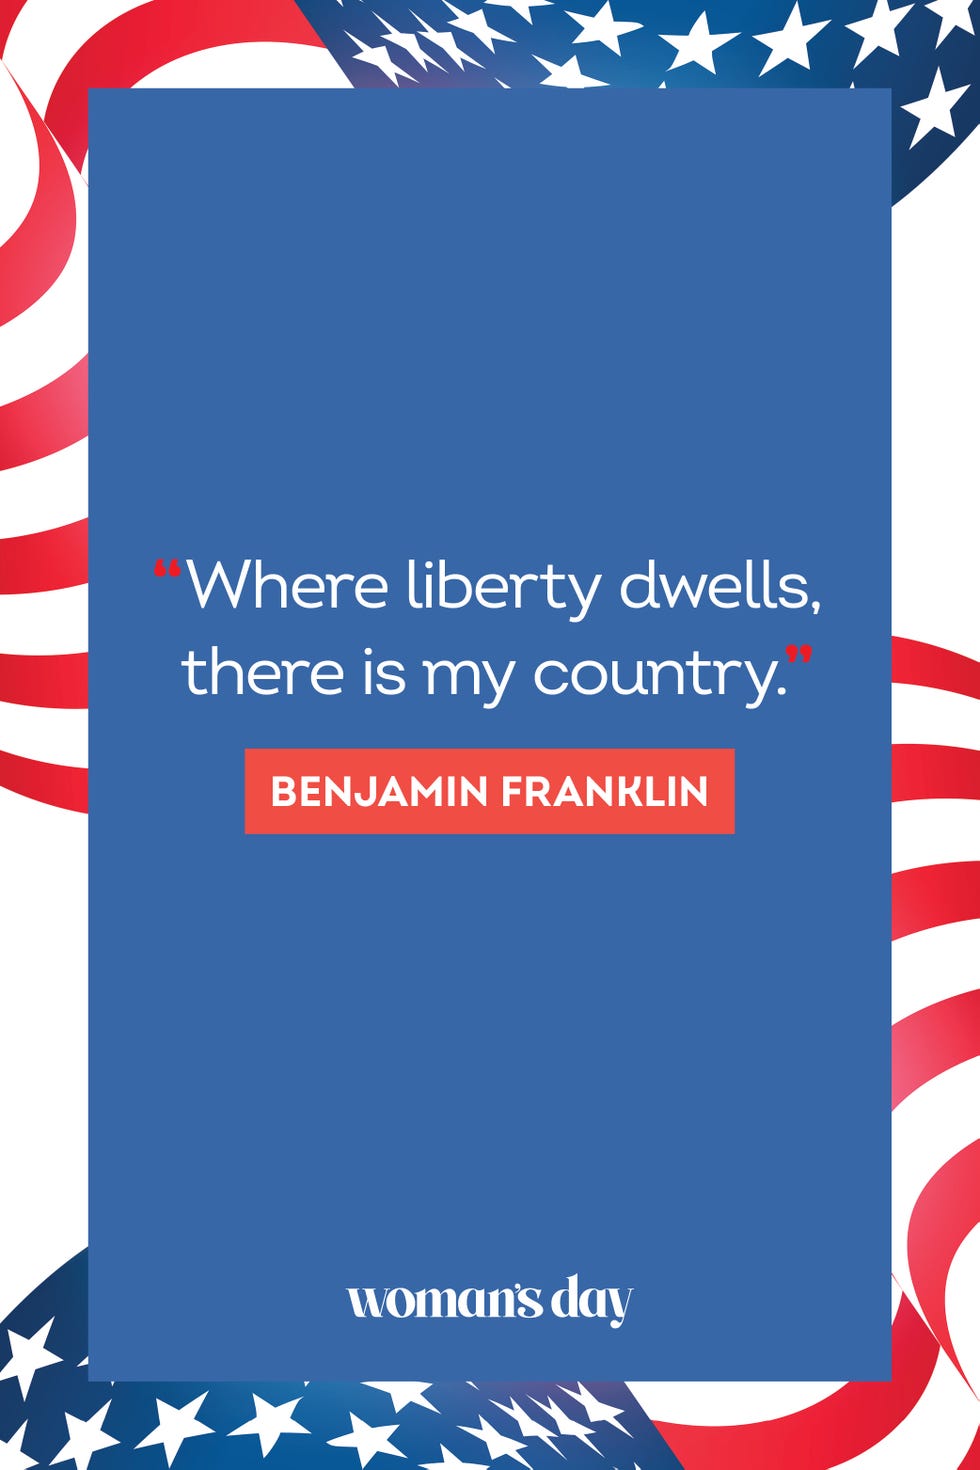 4th of july quotes benjamin franklin